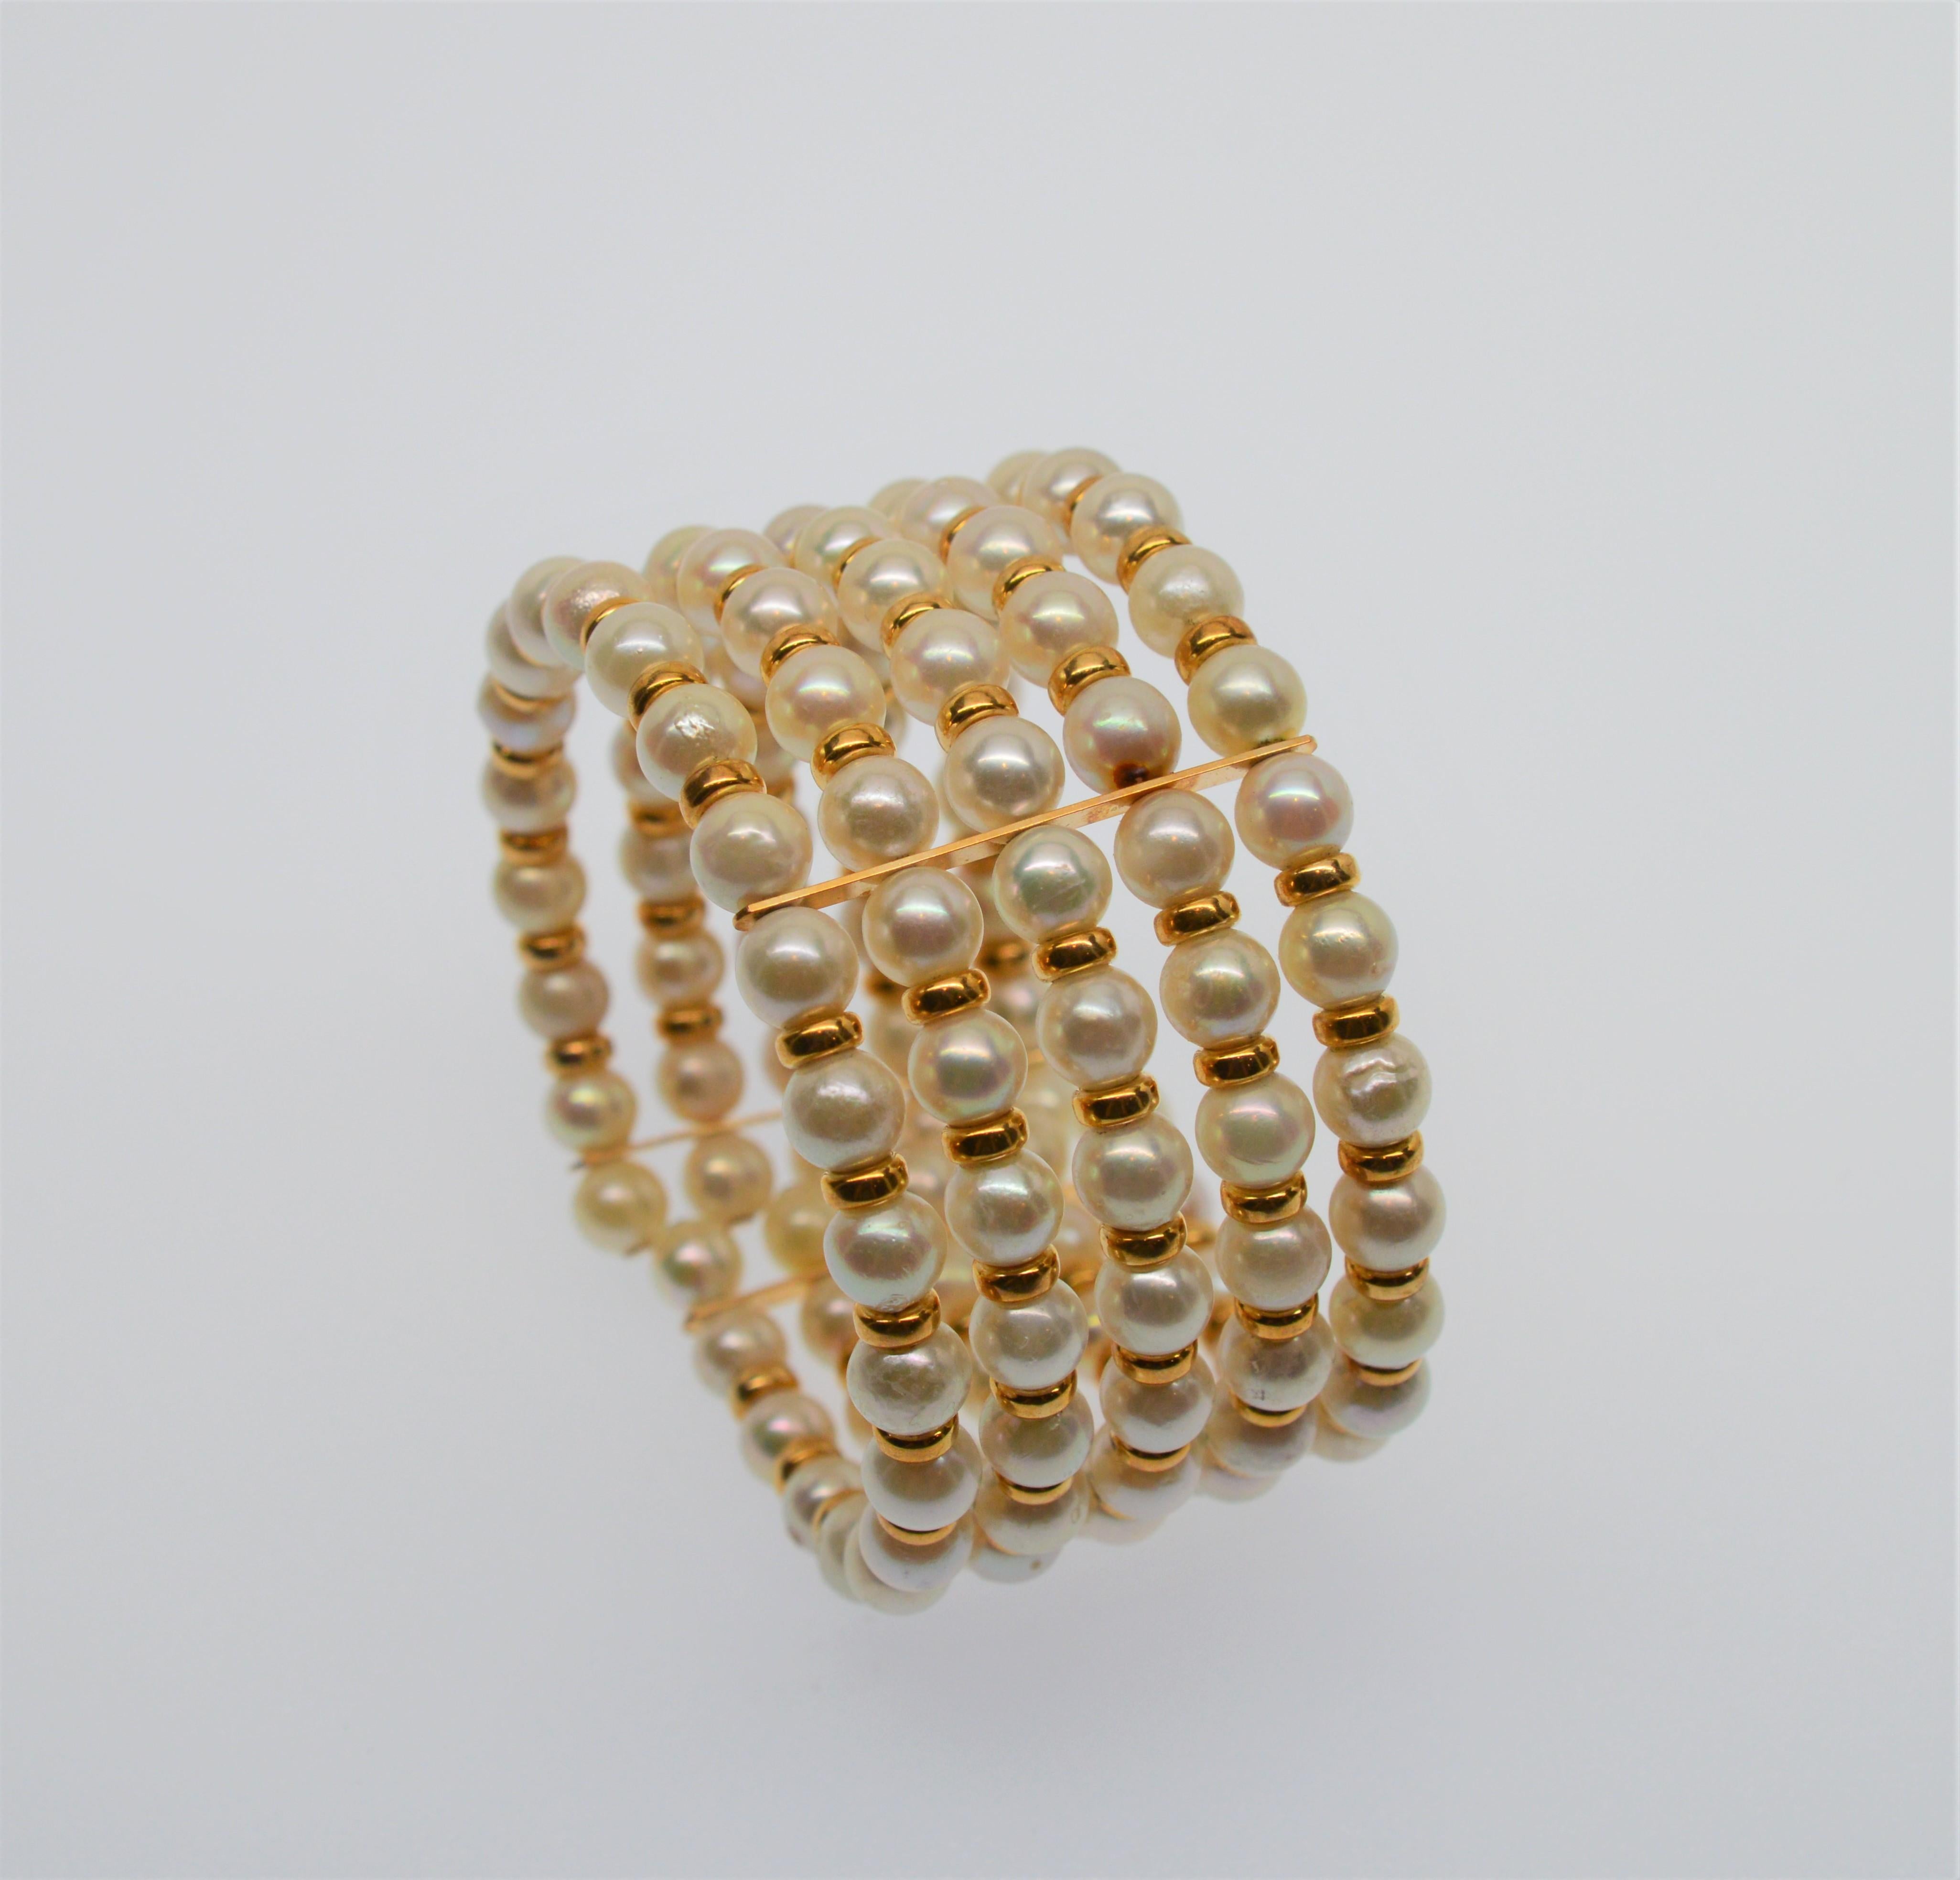 Five Row Akoya Pearl Expandable Cuff Bracelet with 14 Karat Findings. 
Multiple Rows of 6mm AAA Creamy White Akoya Pearls strung with alternating 14 Karat Gold Beads
make this piece pop. Flexible cuff to fit most. Measures approximately 1 1/4